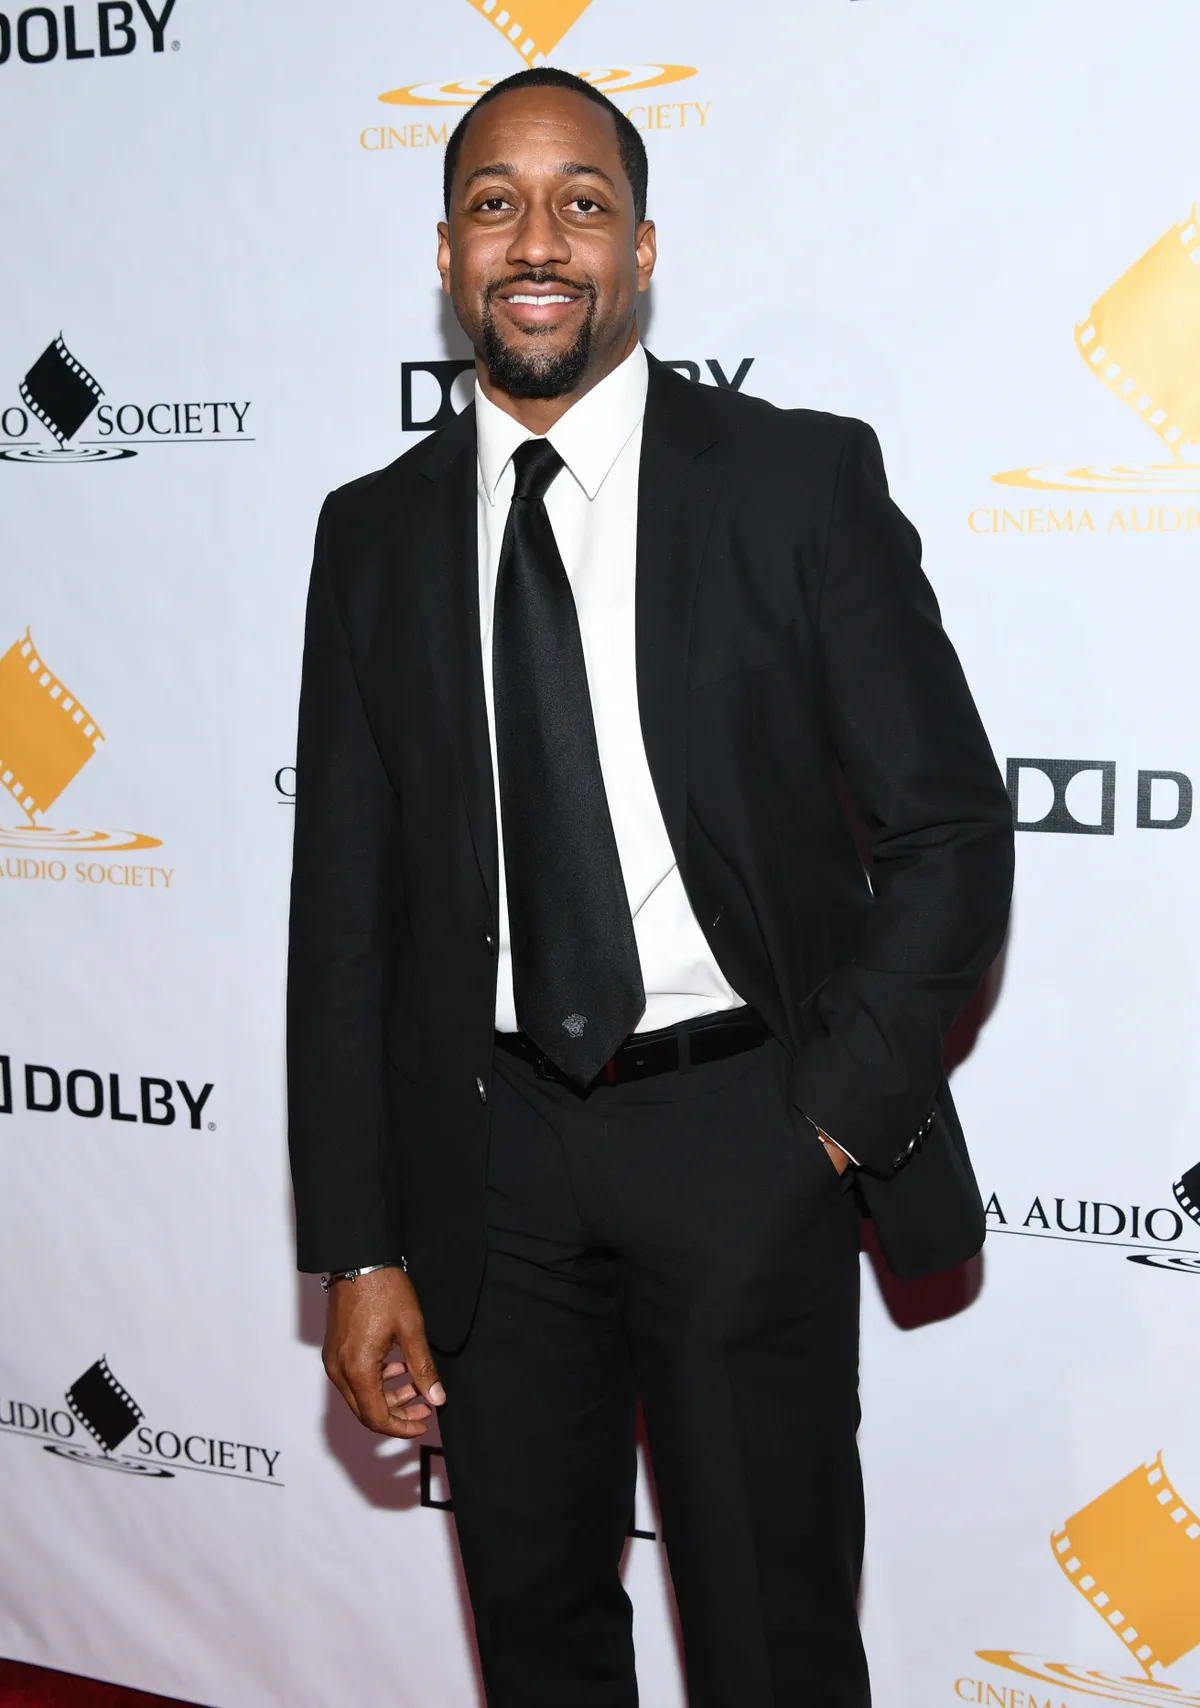 Jaleel White at the 54th Cinema Audio Society Awards in Los Angeles, California on February 24, 2018. | Photo: Getty Images